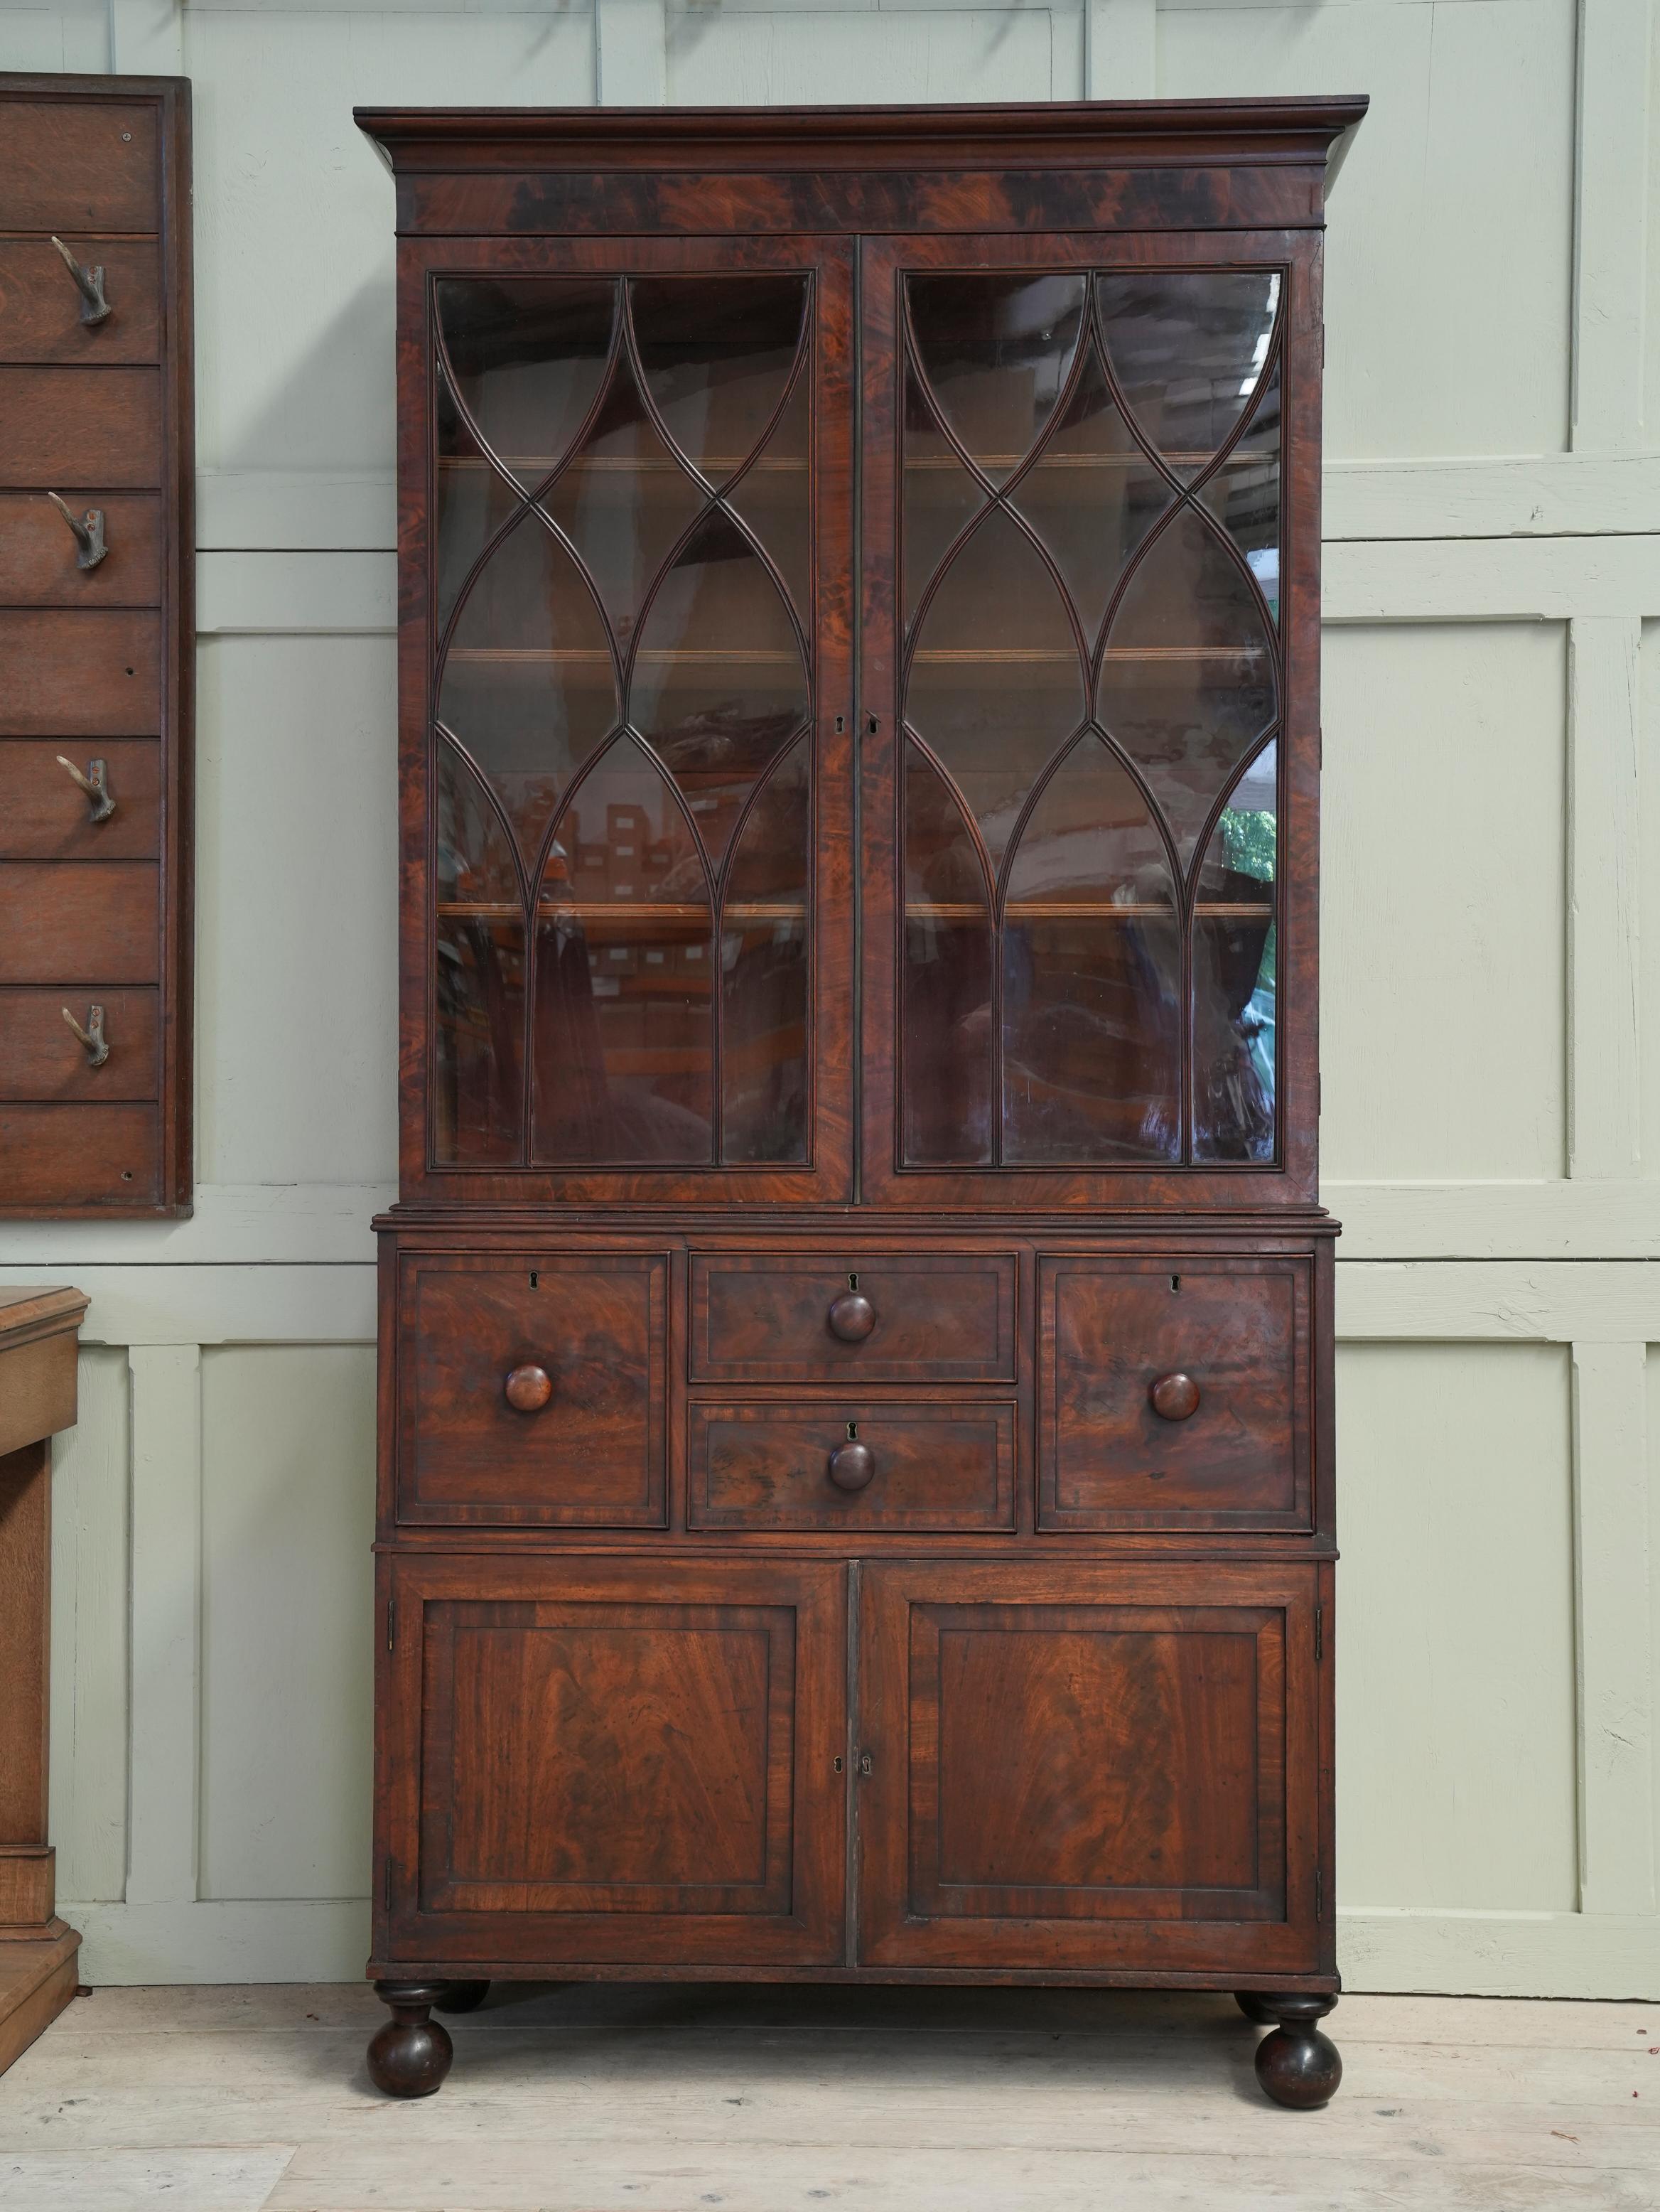 The astralgal glazed doors above four drawers, one being a lead lined cellarette, solid fielded panel doors below.

Elegant and a good narrow size with well chosen mahogany throughout.